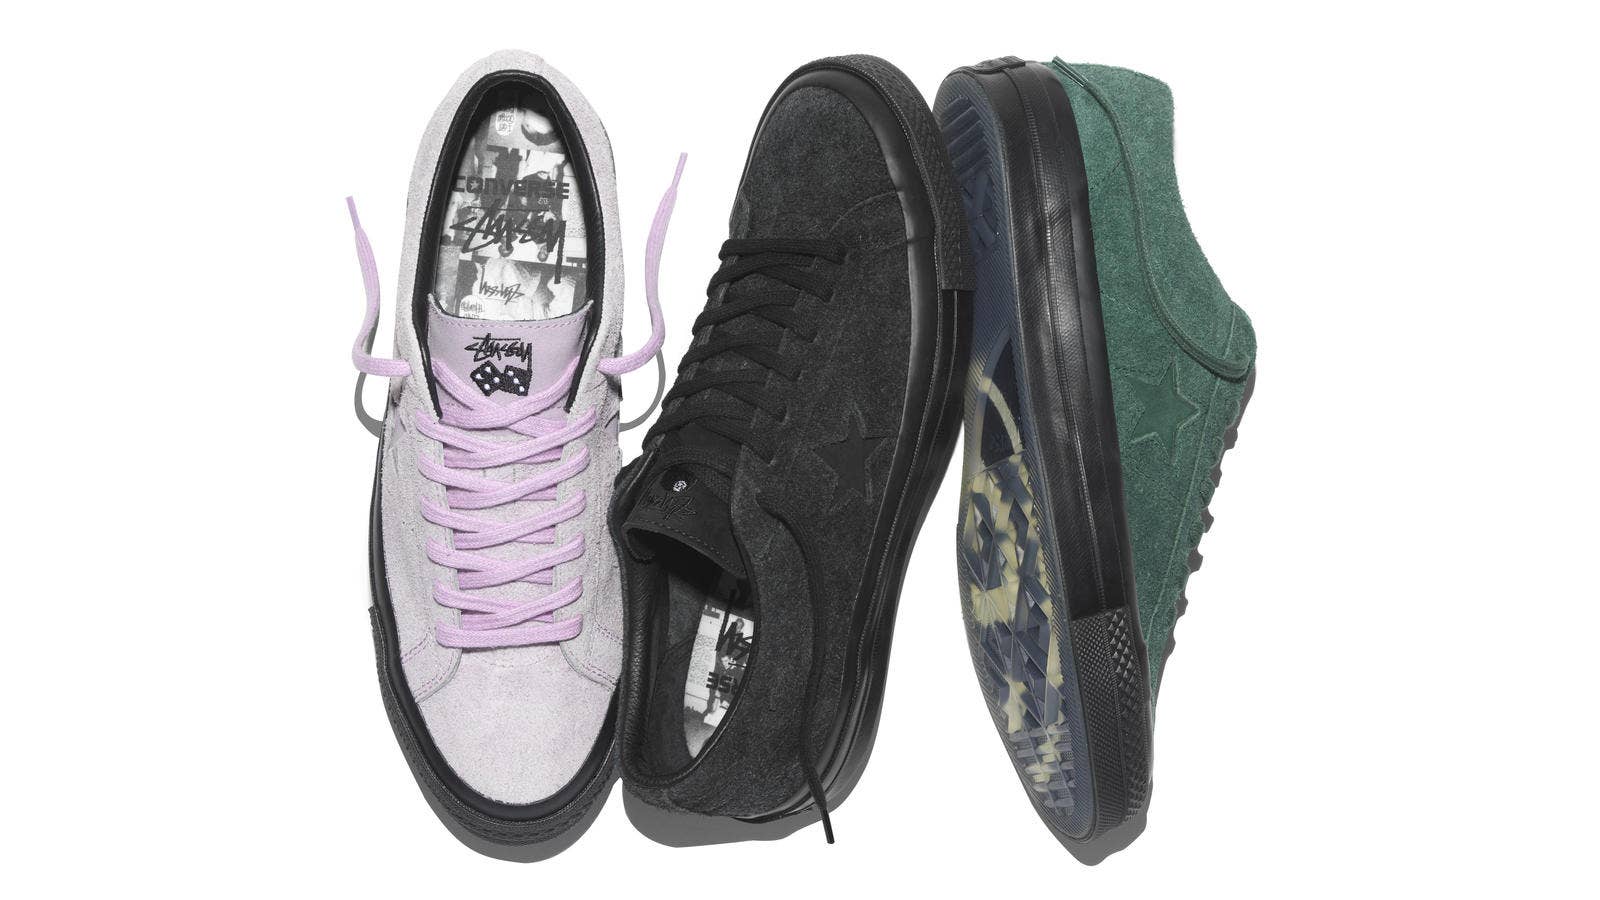 Stussy x Converse One Star 74 Collab